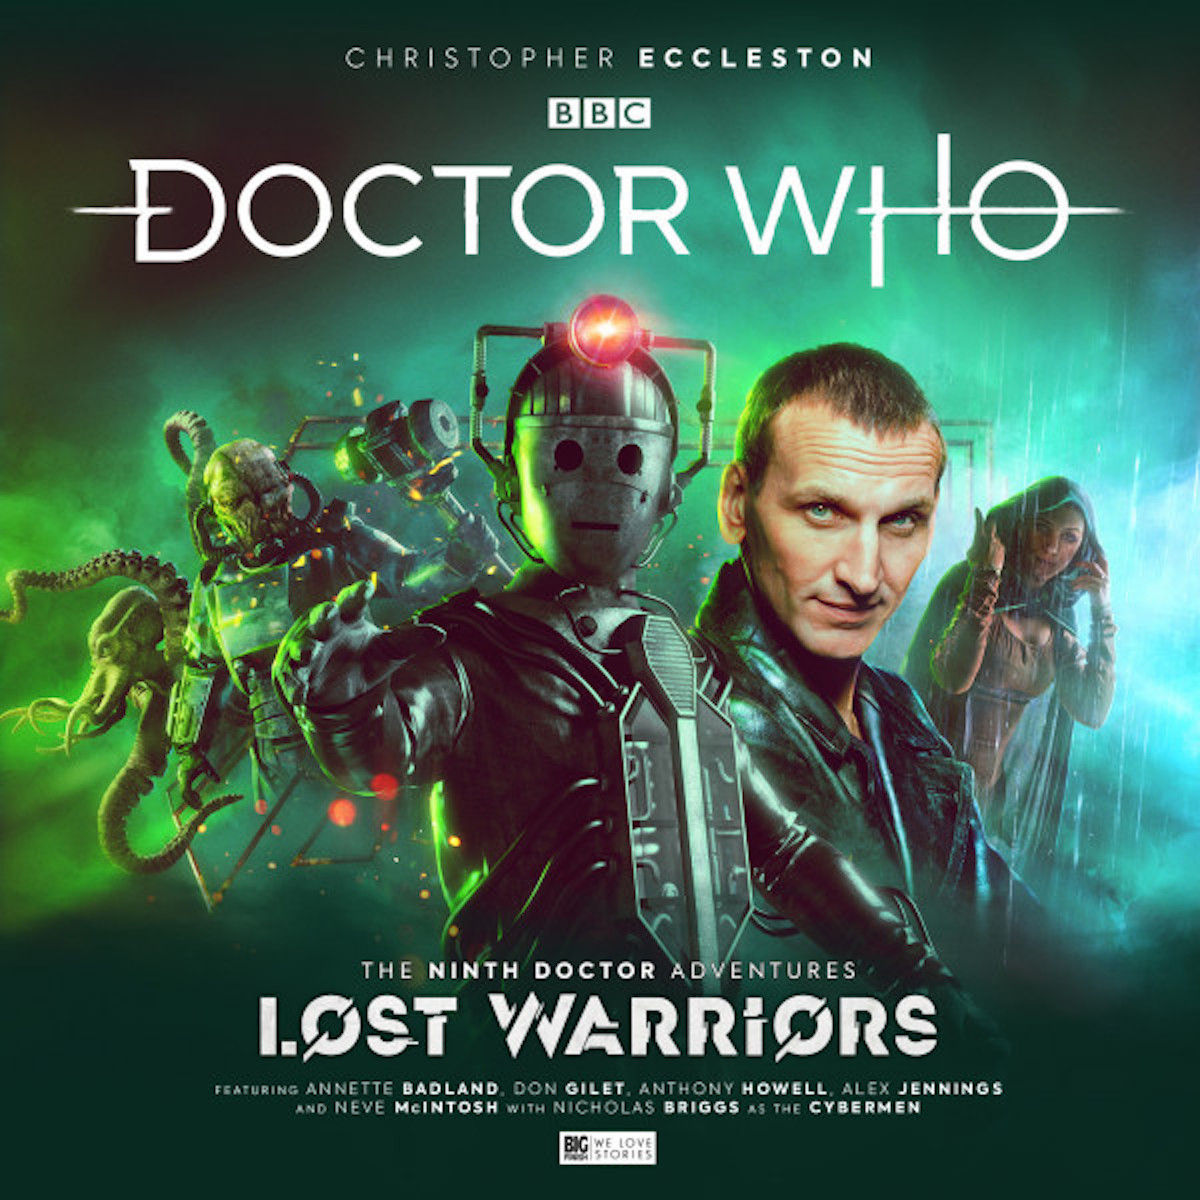 The Ninth Doctor Adventures Volume 3 White Warriors